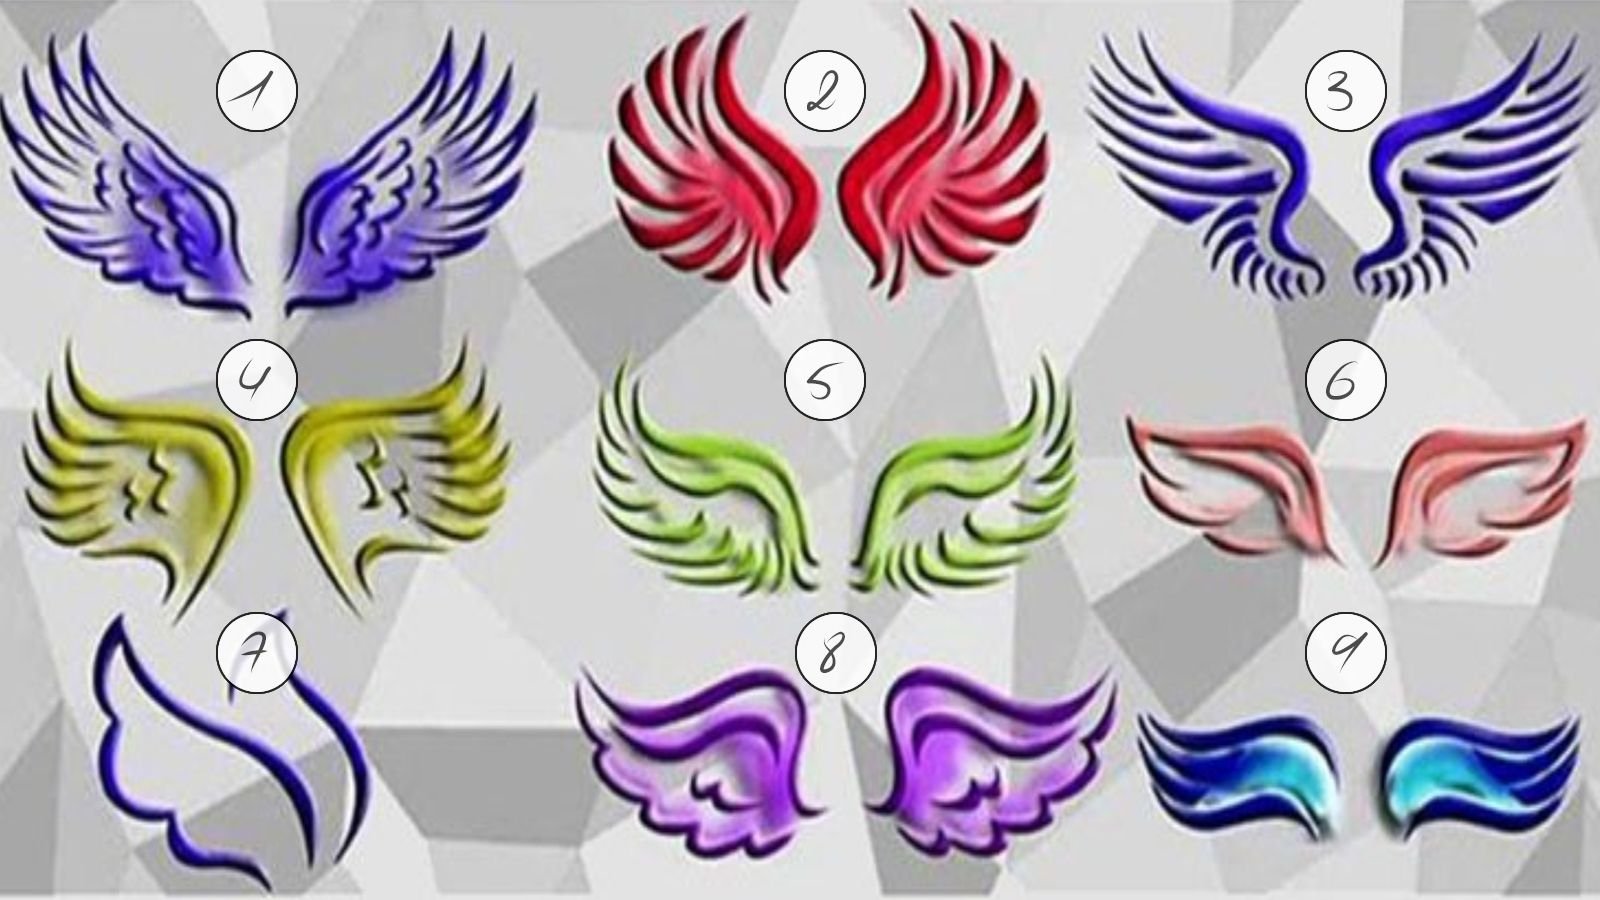 Quiz: The wings you choose reveal your hidden powers 1